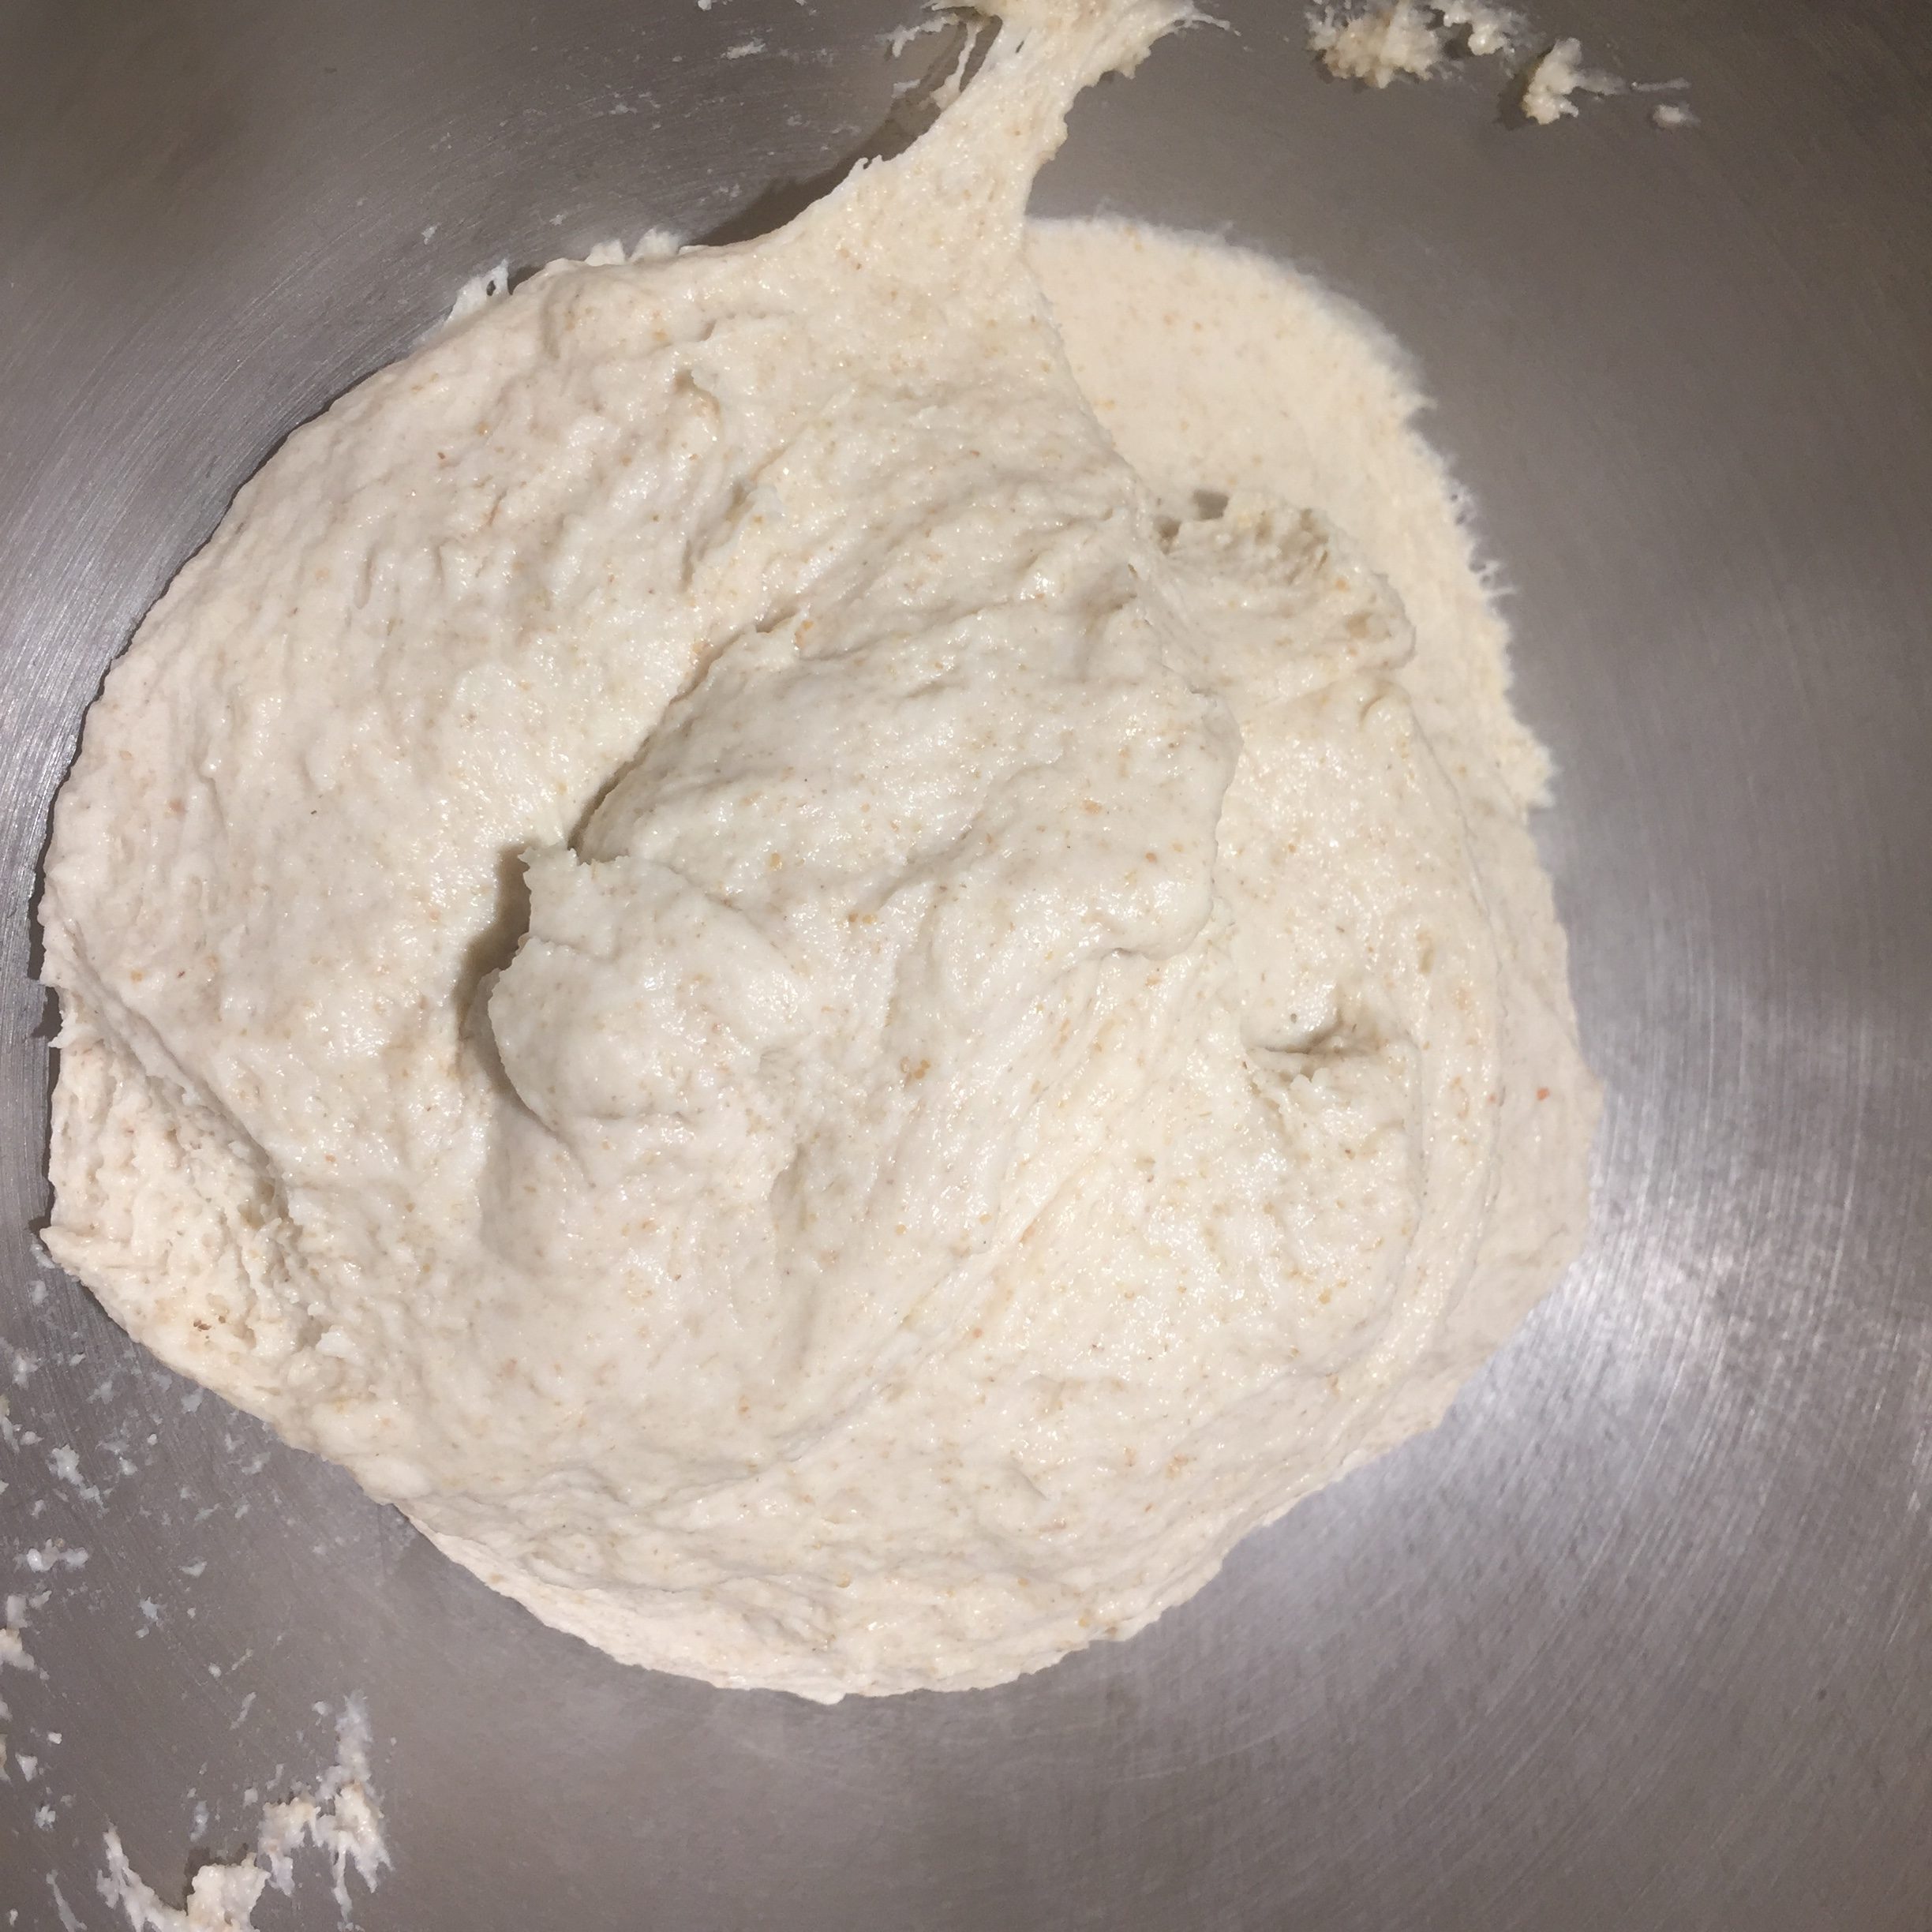 Dough after second kneading